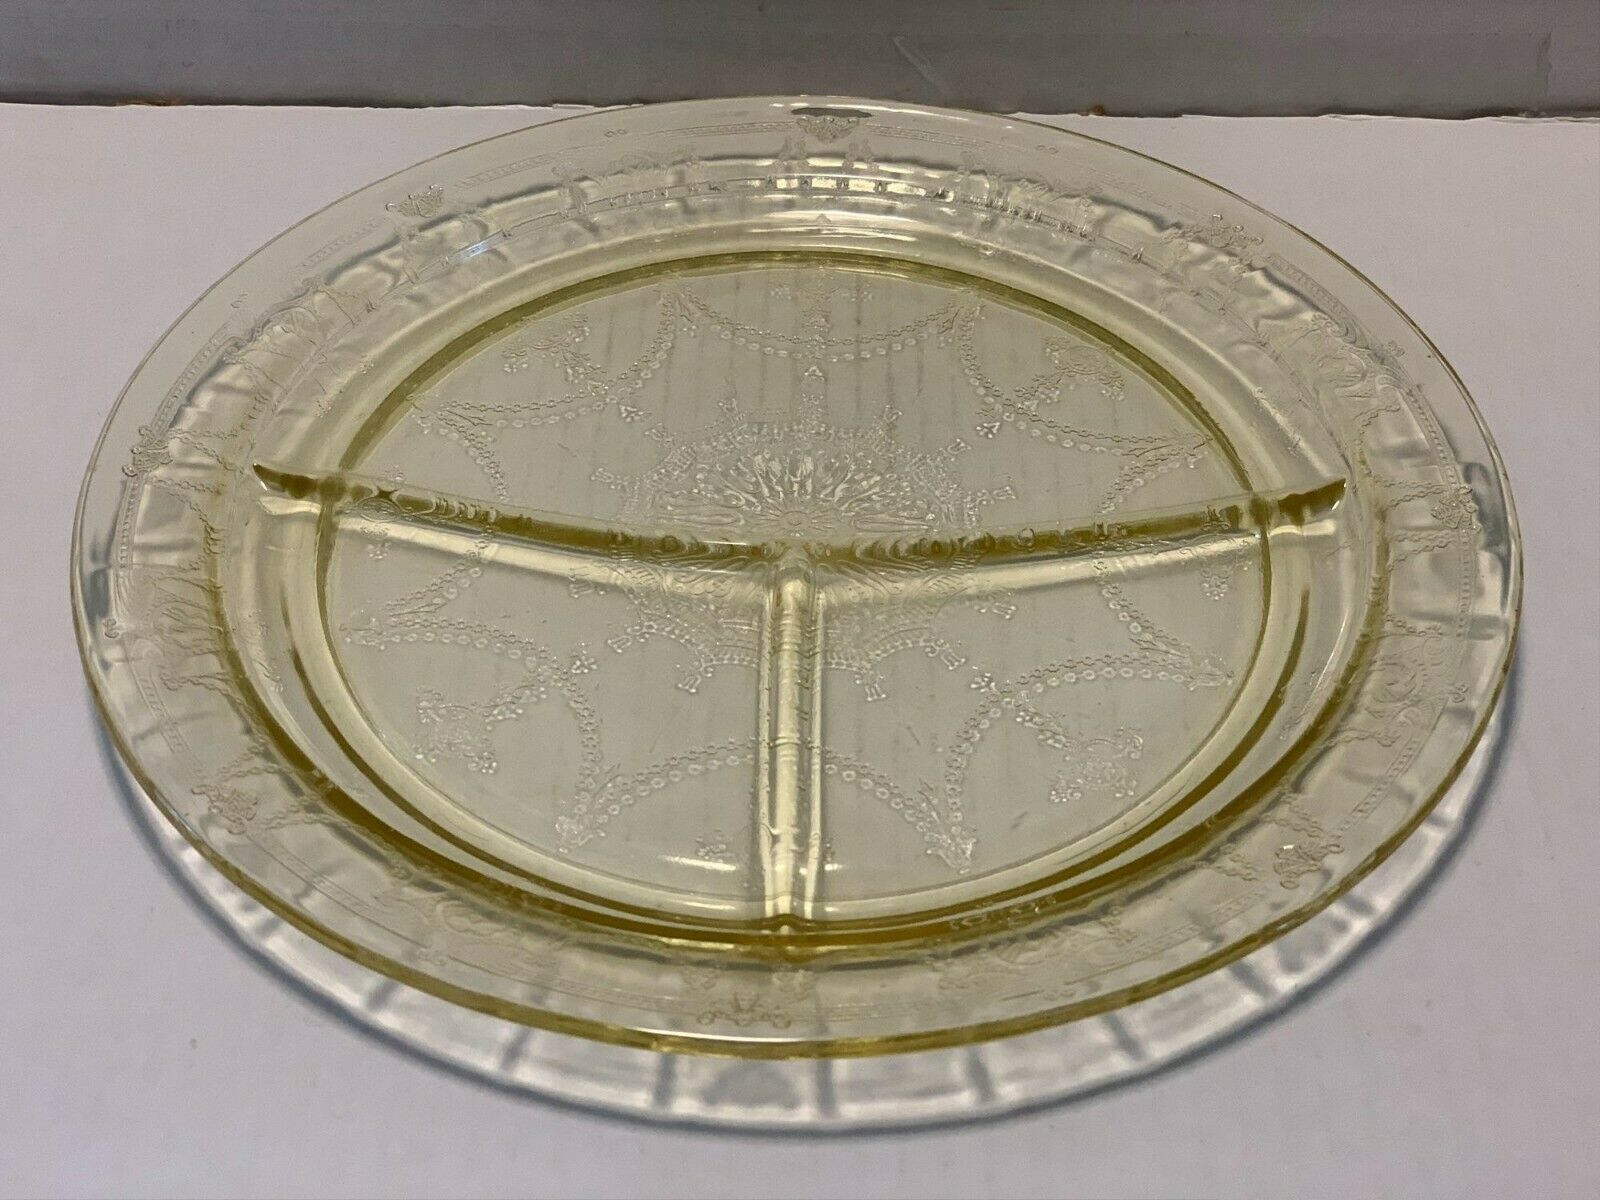 Yellow Cameo Depression Glass Divided Grill Plate 10 3/8"